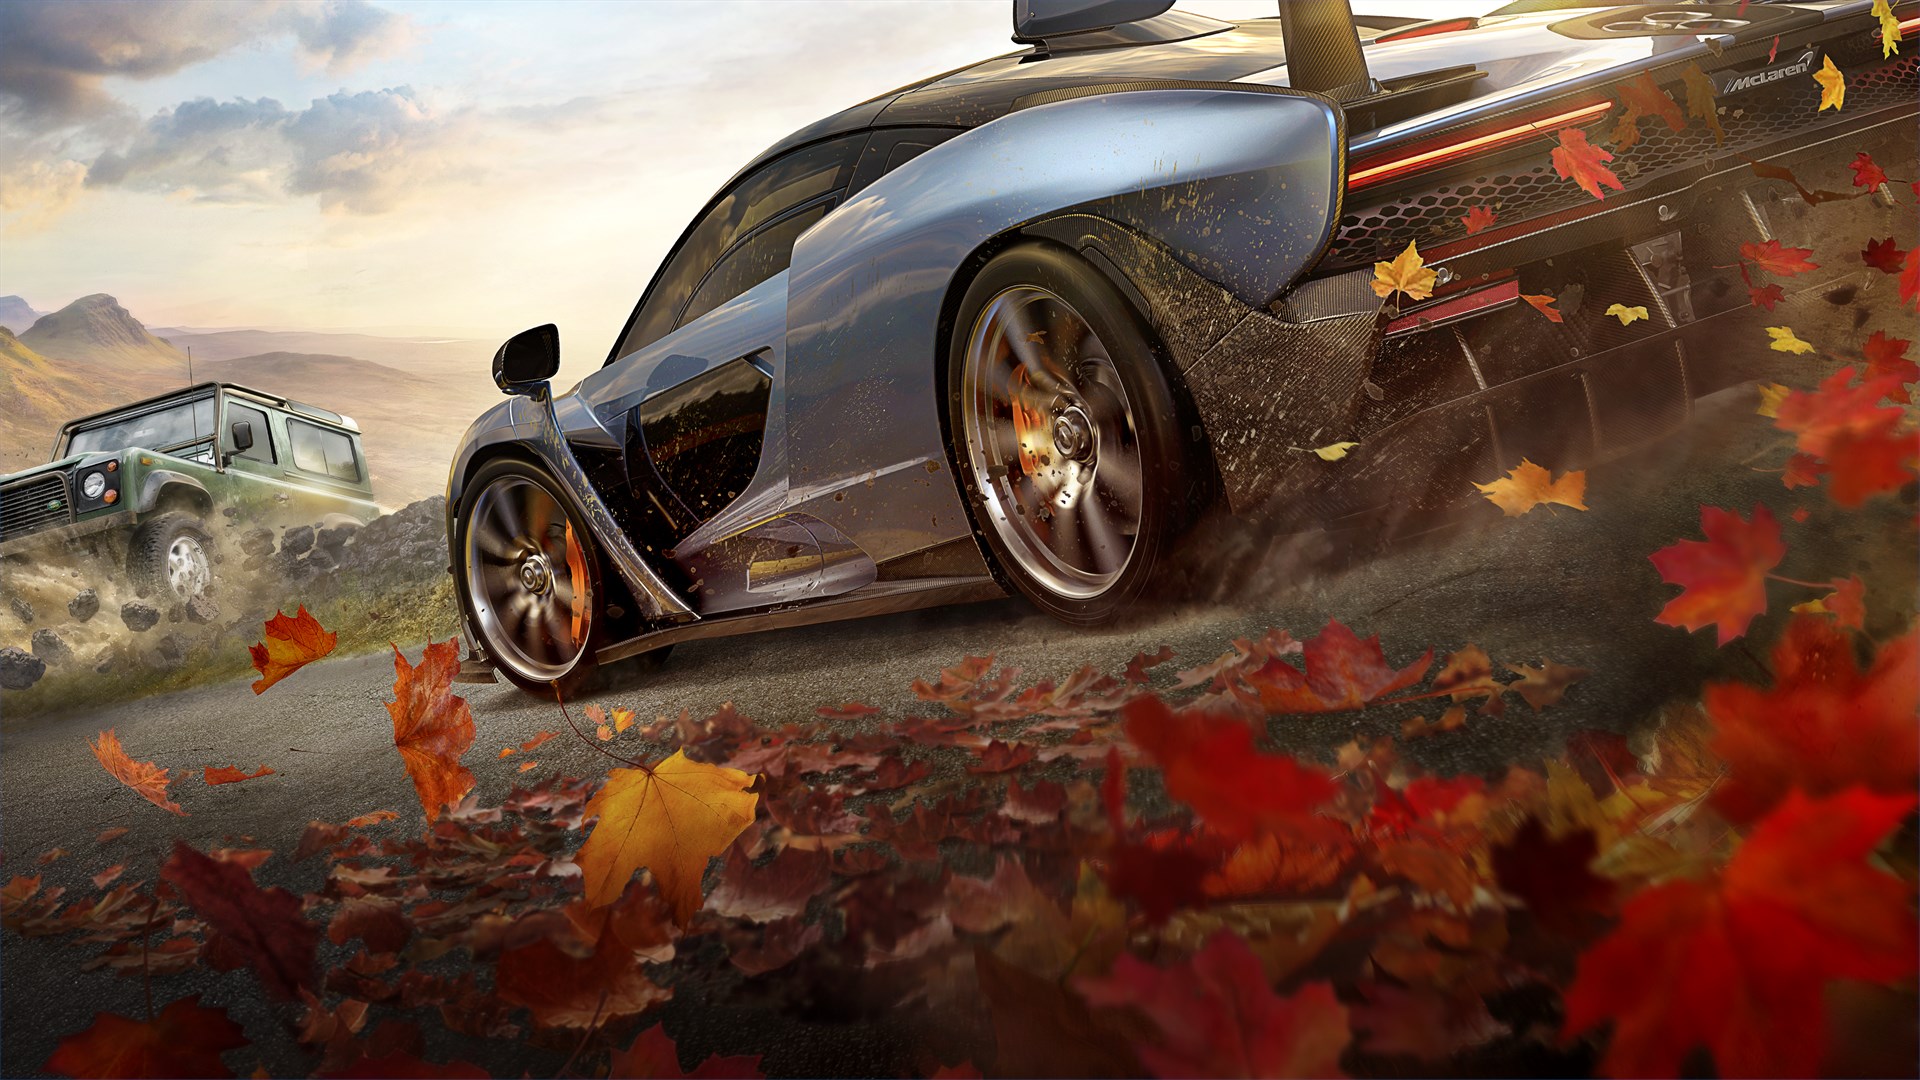 Forza Horizon 4 Tips and Tricks for beginners